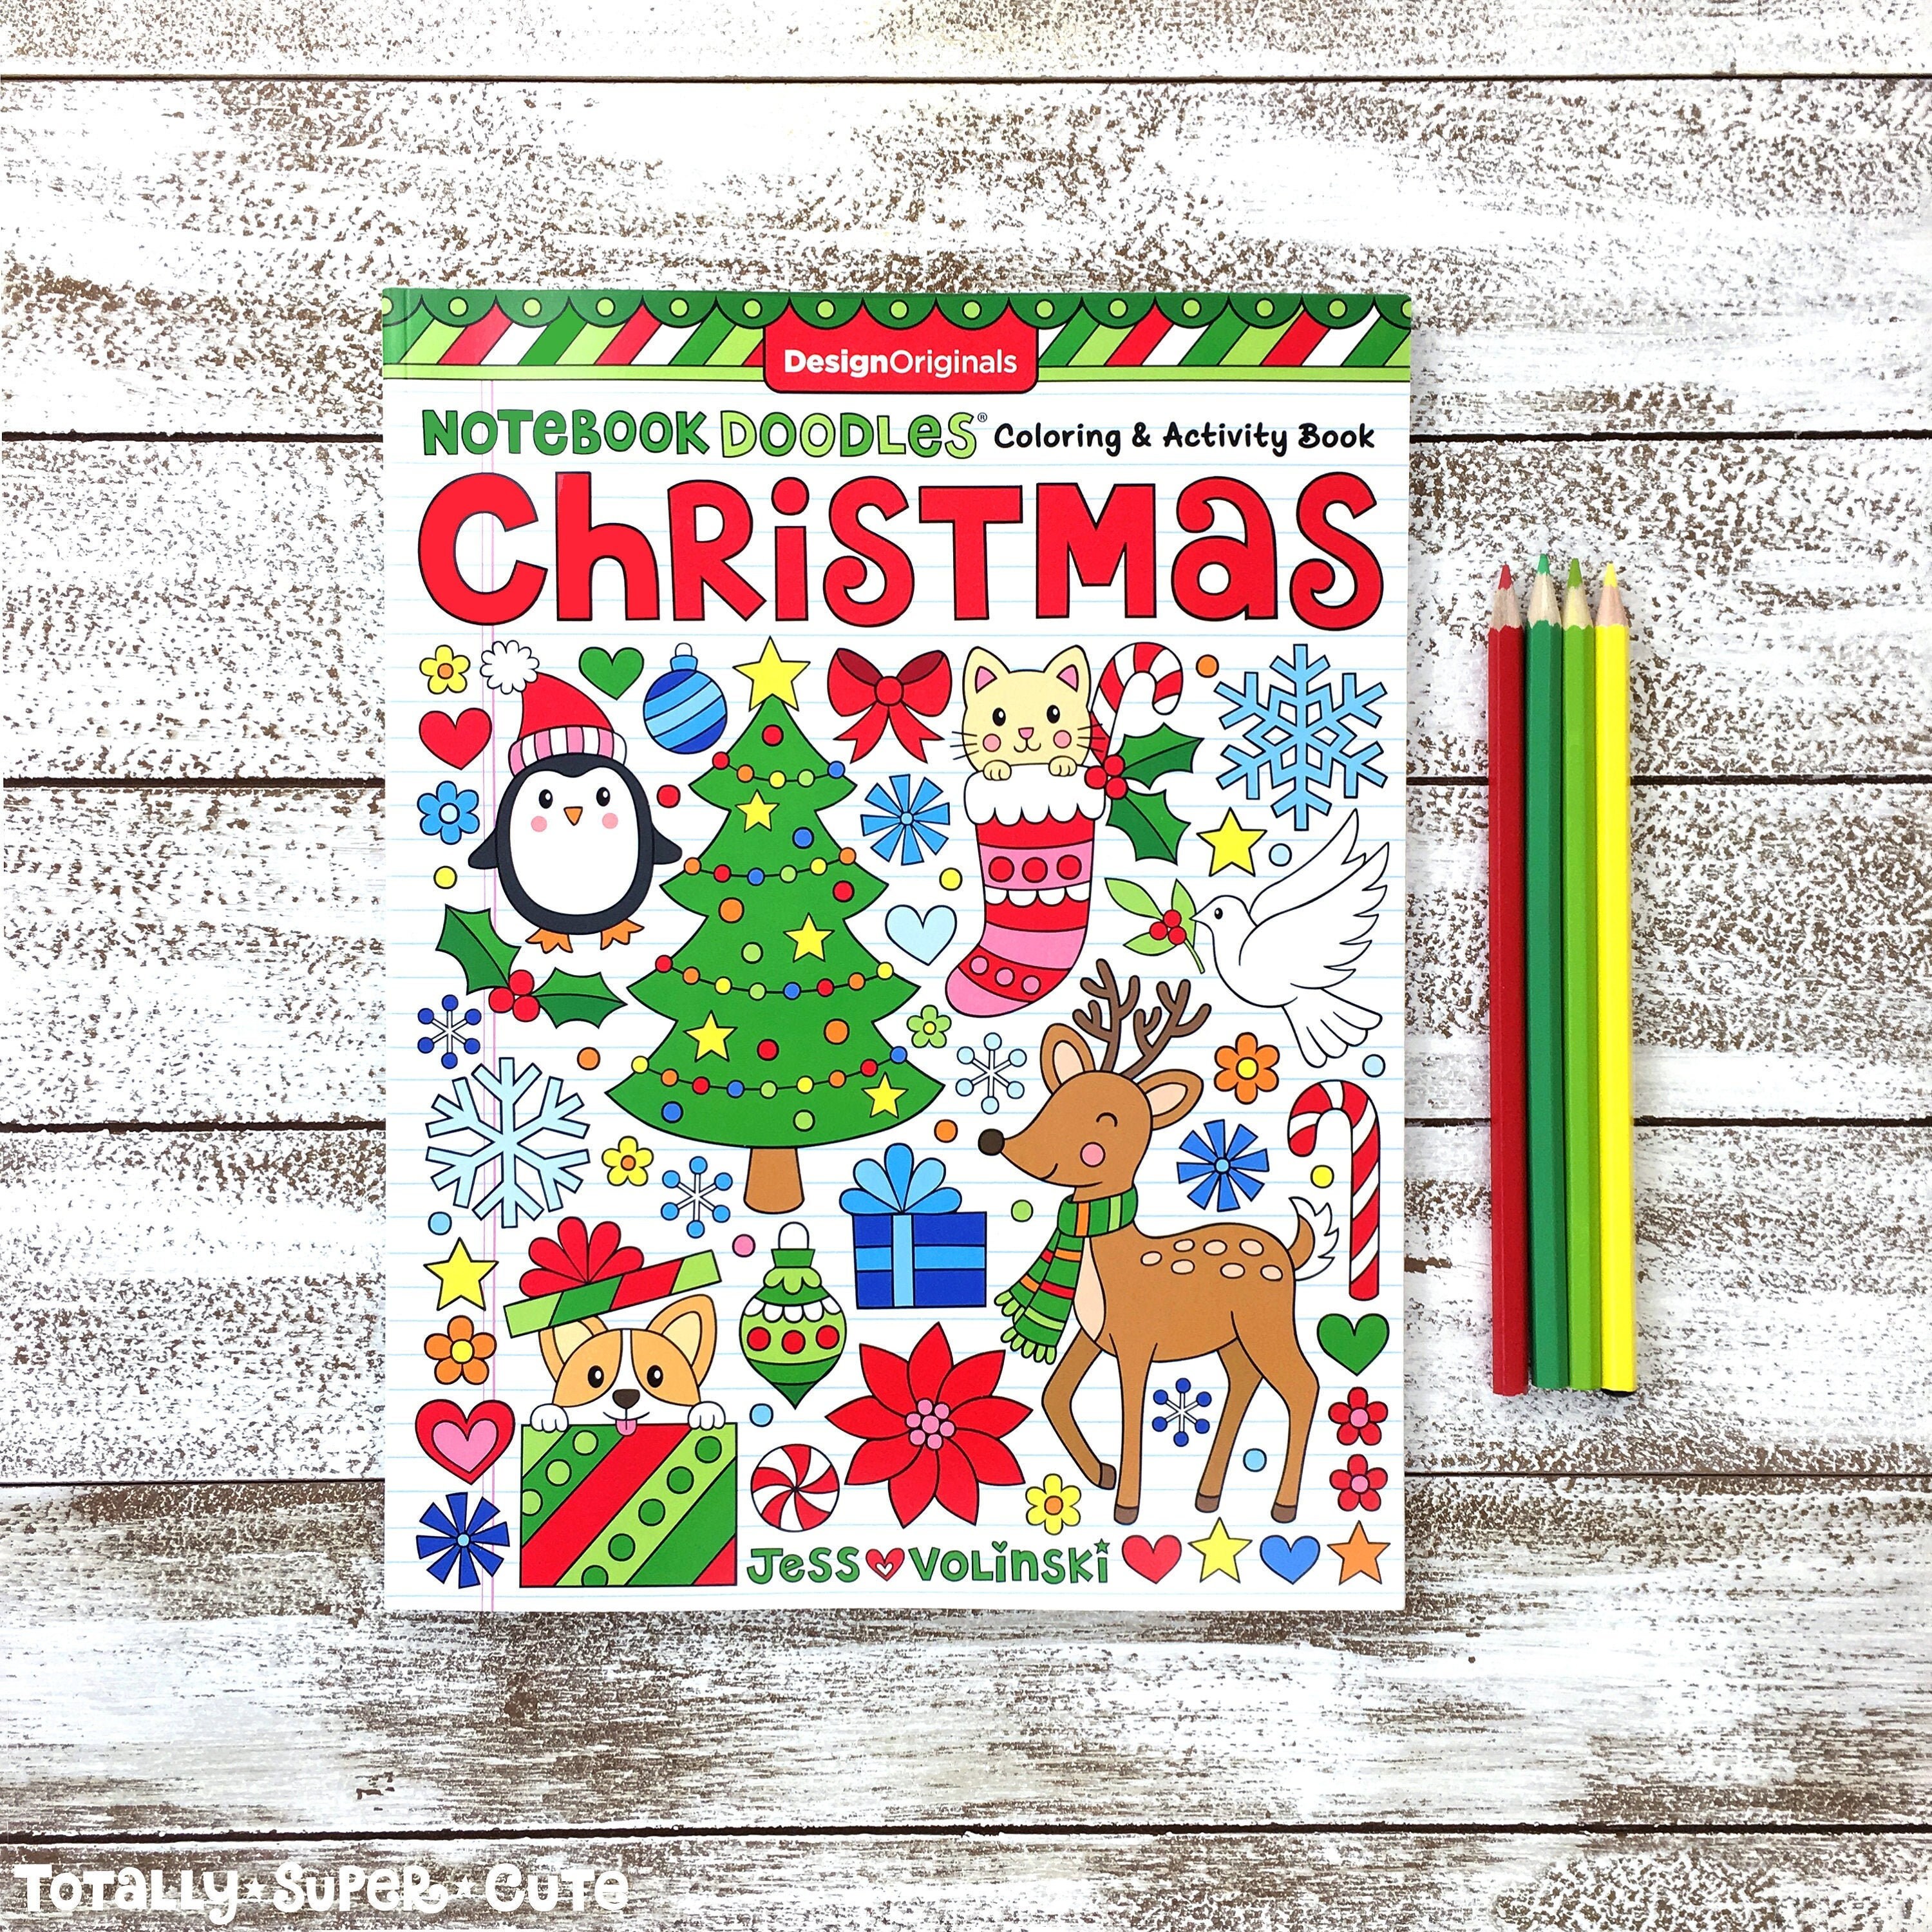 Joyful Coloring Book / Adult Coloring Book / Marker Coloring Book /  Stocking Stuffer / Christmas Gift / Coloring Book, Unicorn Coloring Book 